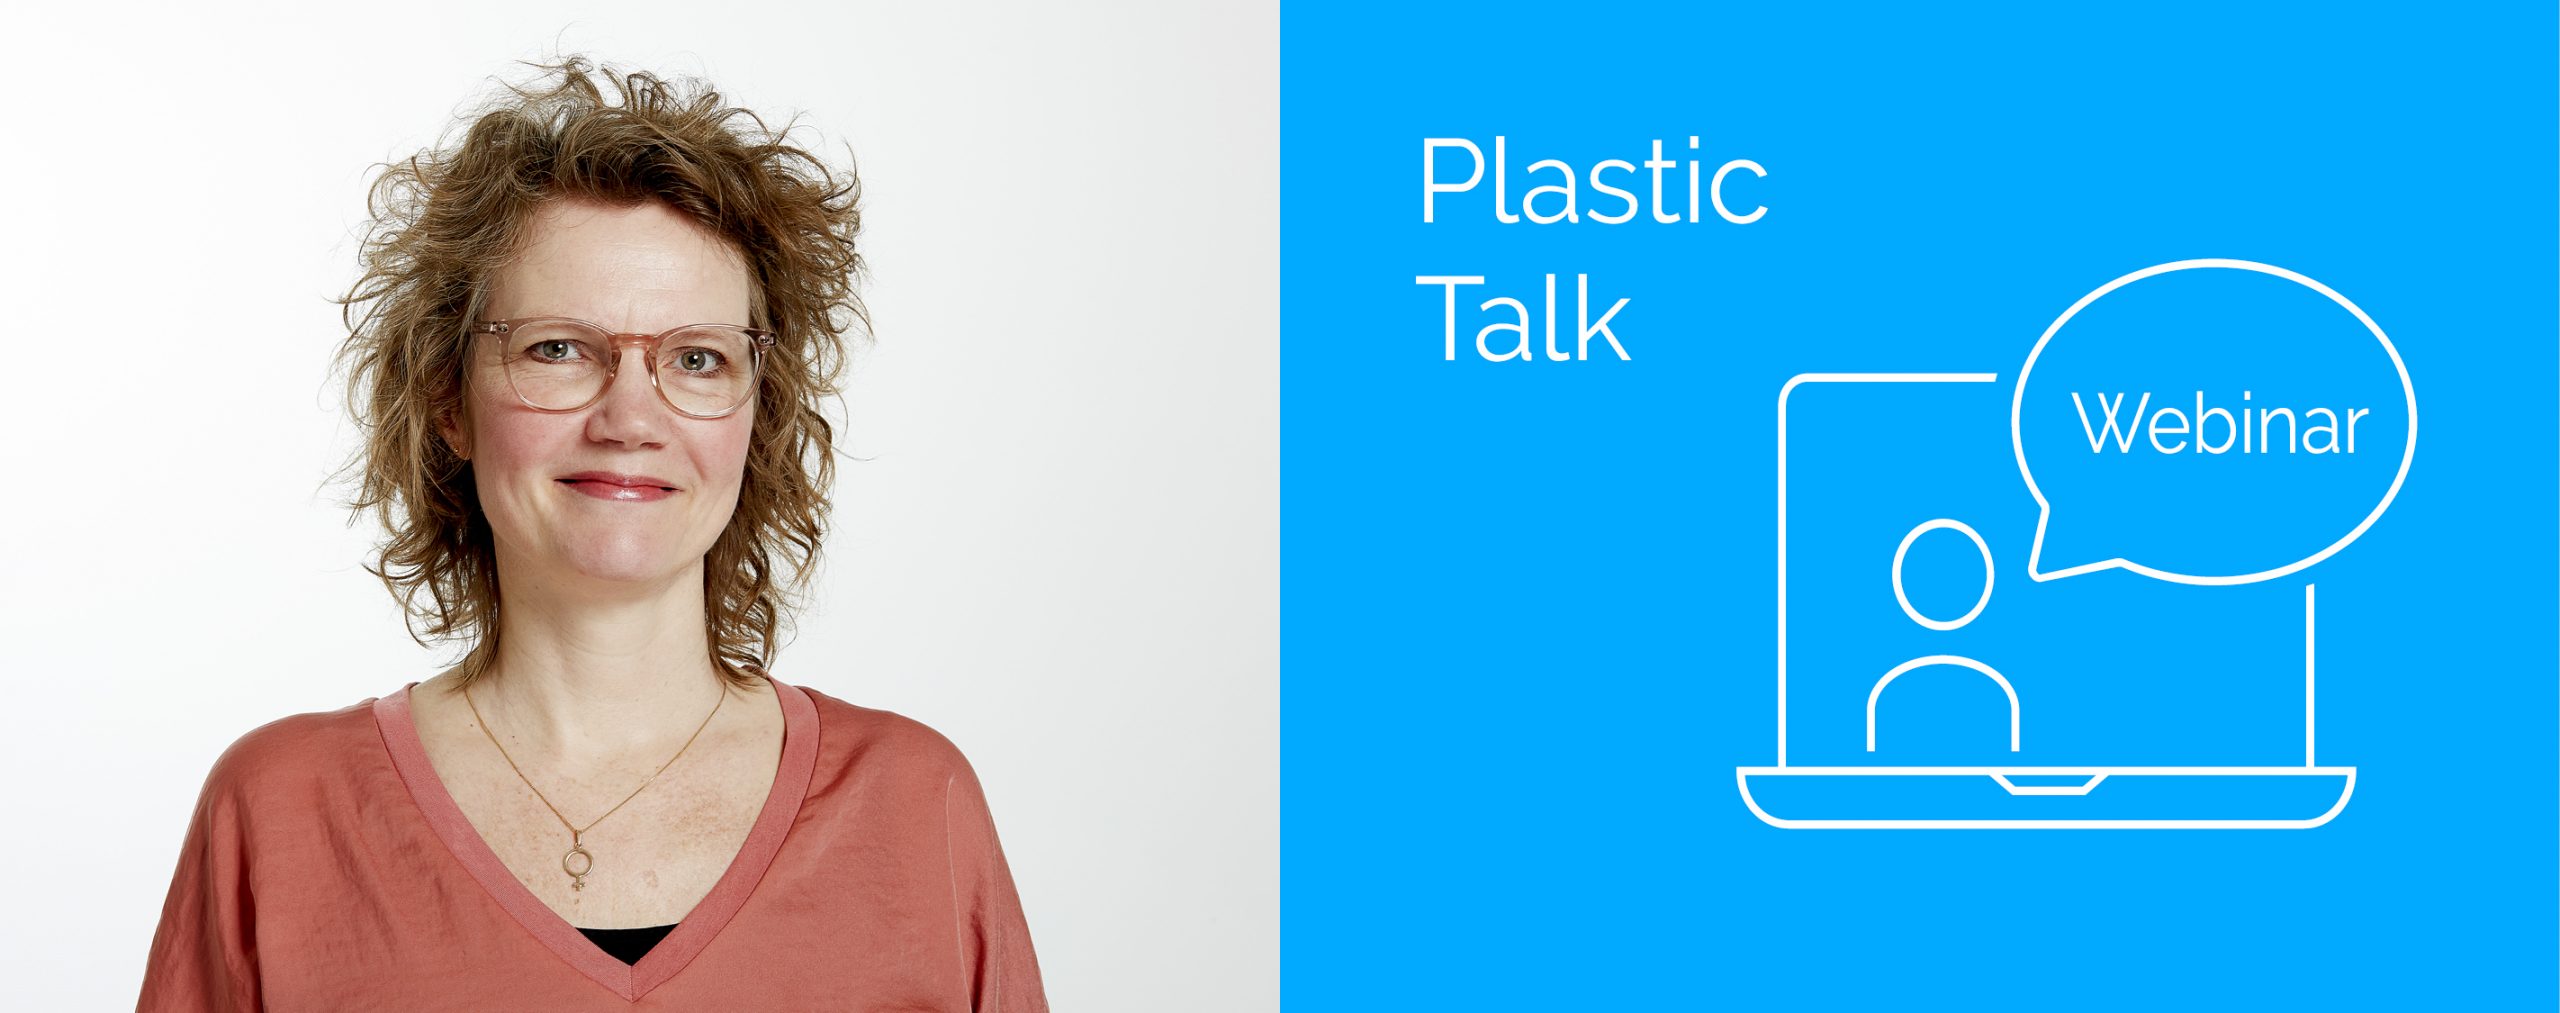 Plastic Talk: Improve your chances in the PROJECT PLASTIC competition